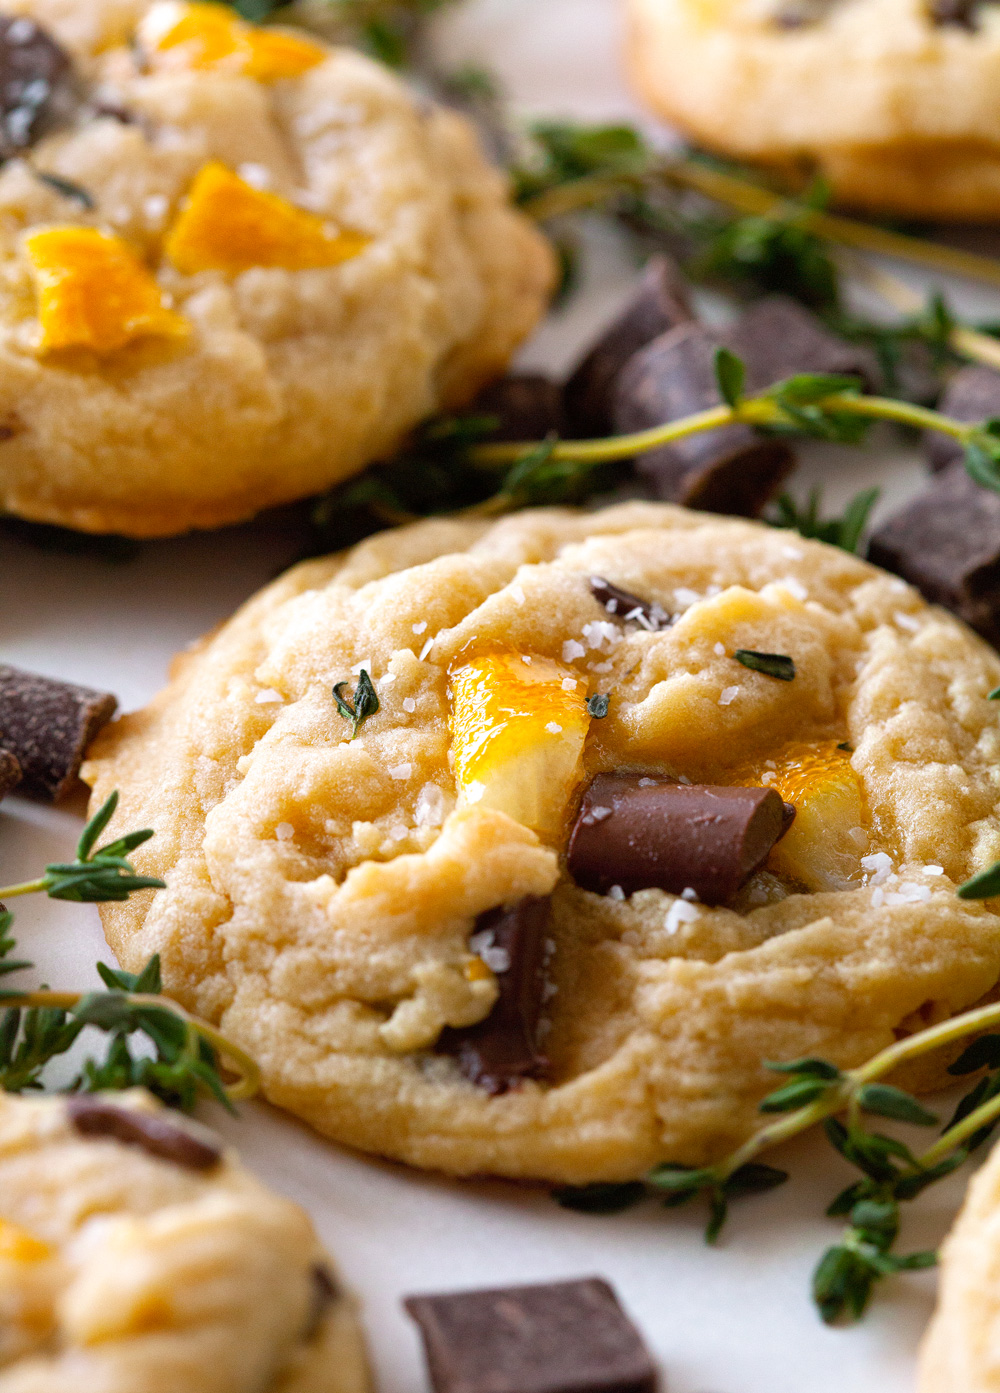 Candied Meyer Lemon and Thyme Salted Chocolate Chippers by Deliciously Yum!